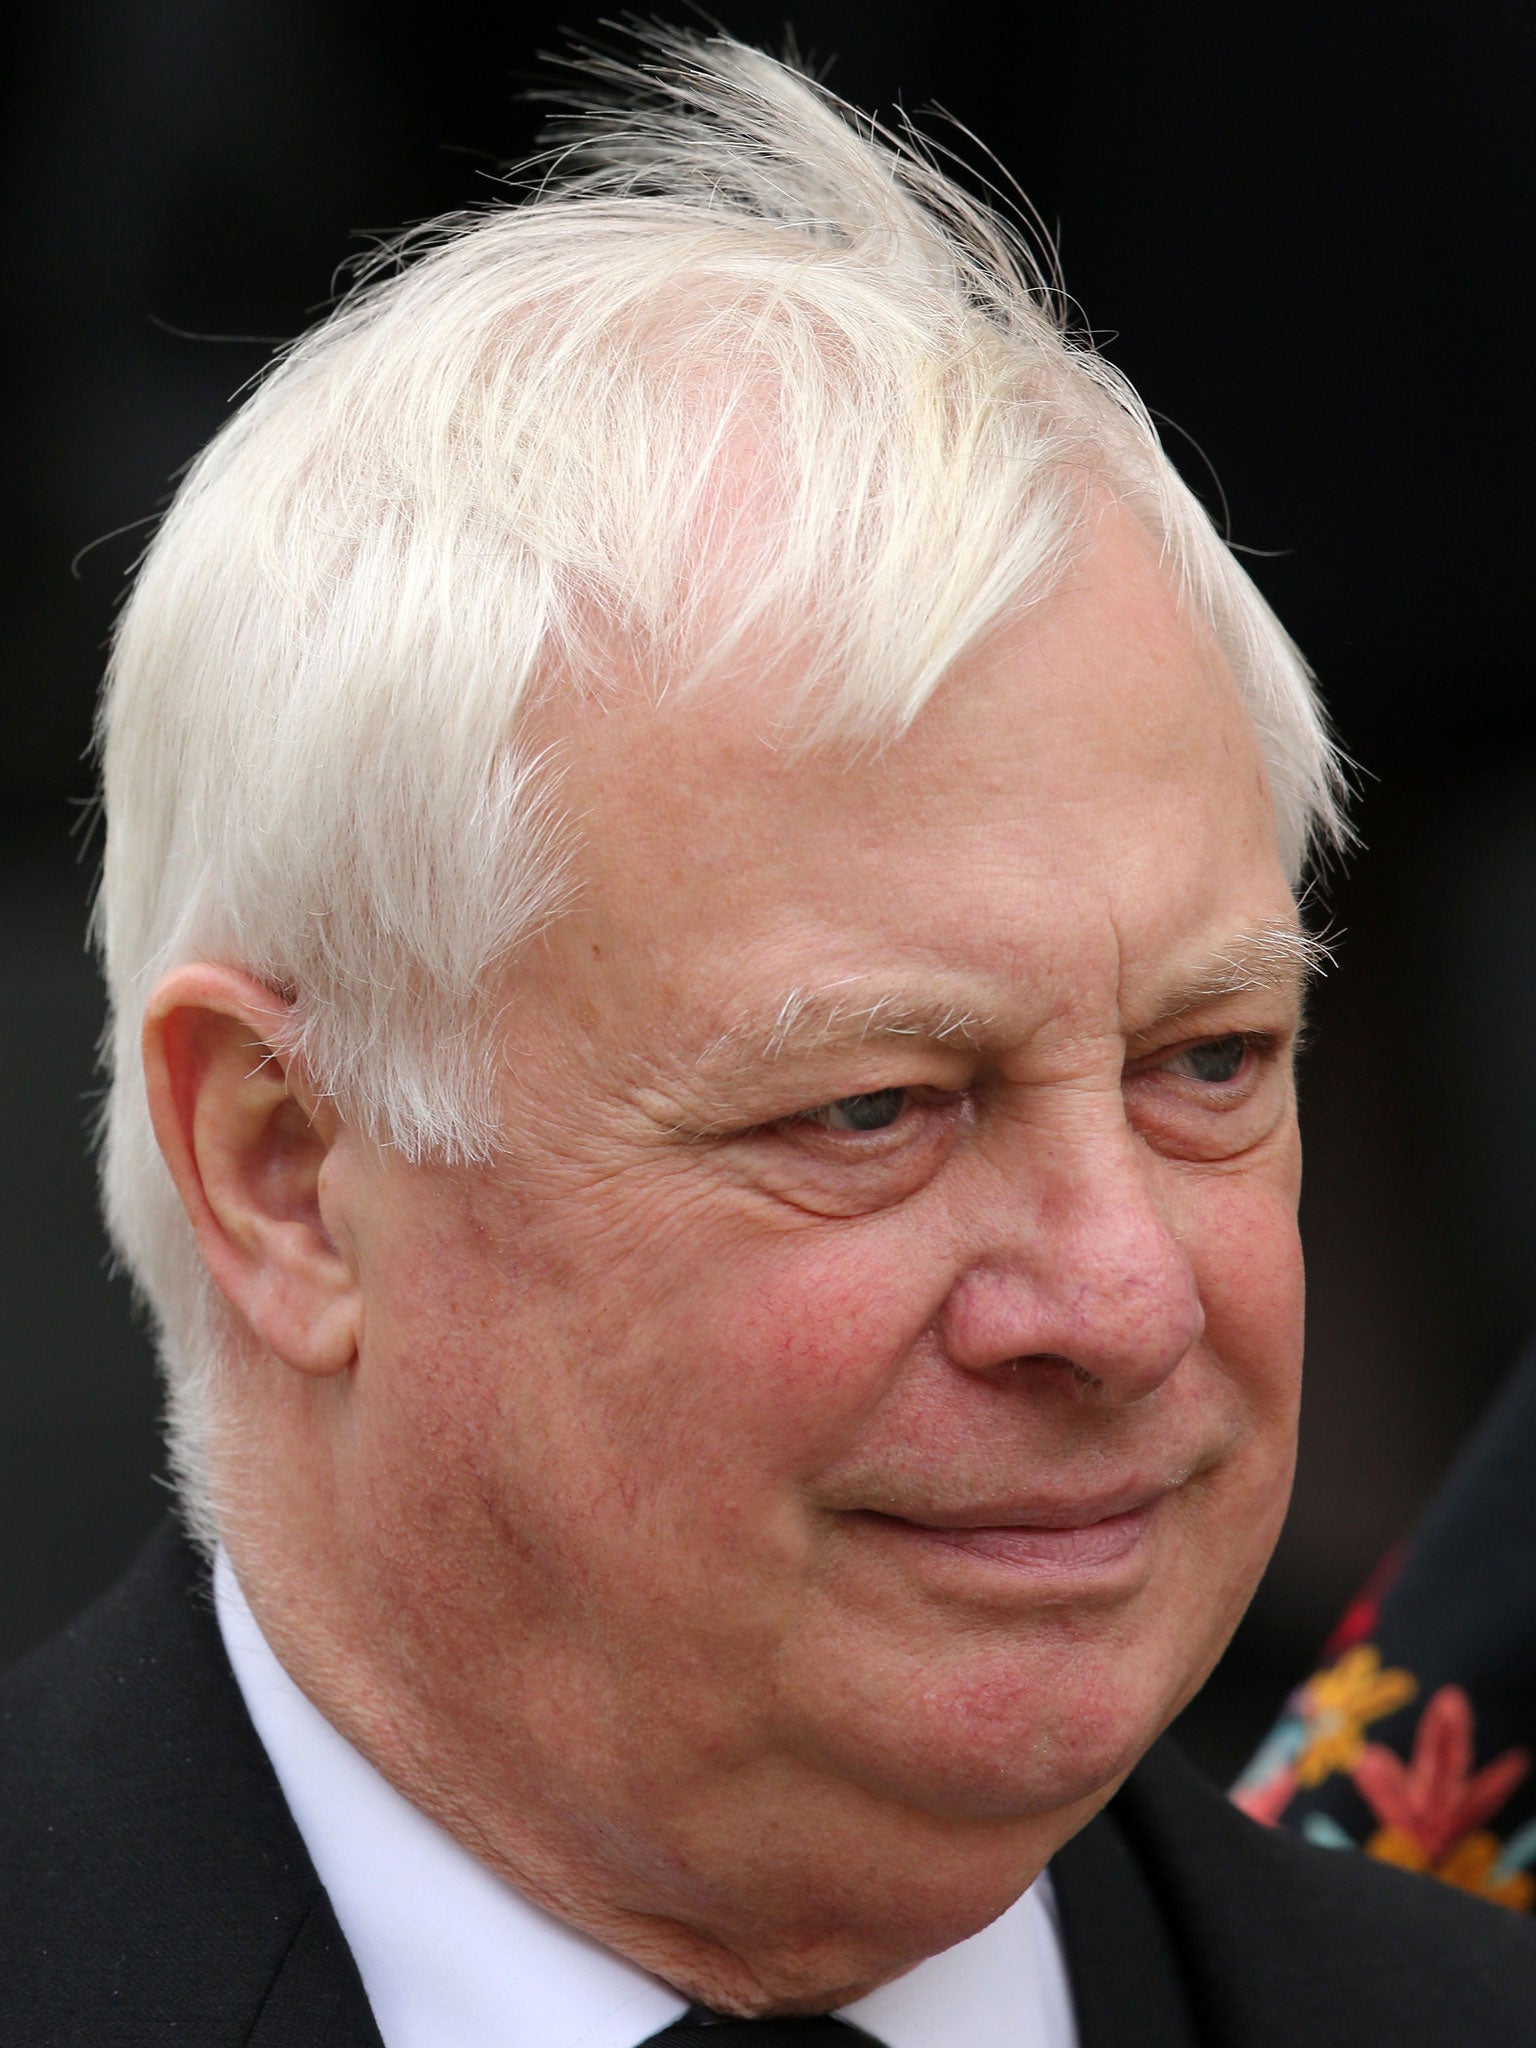 BBC payoffs to senior staff could not always be justified said the trust chairman Lord Patten